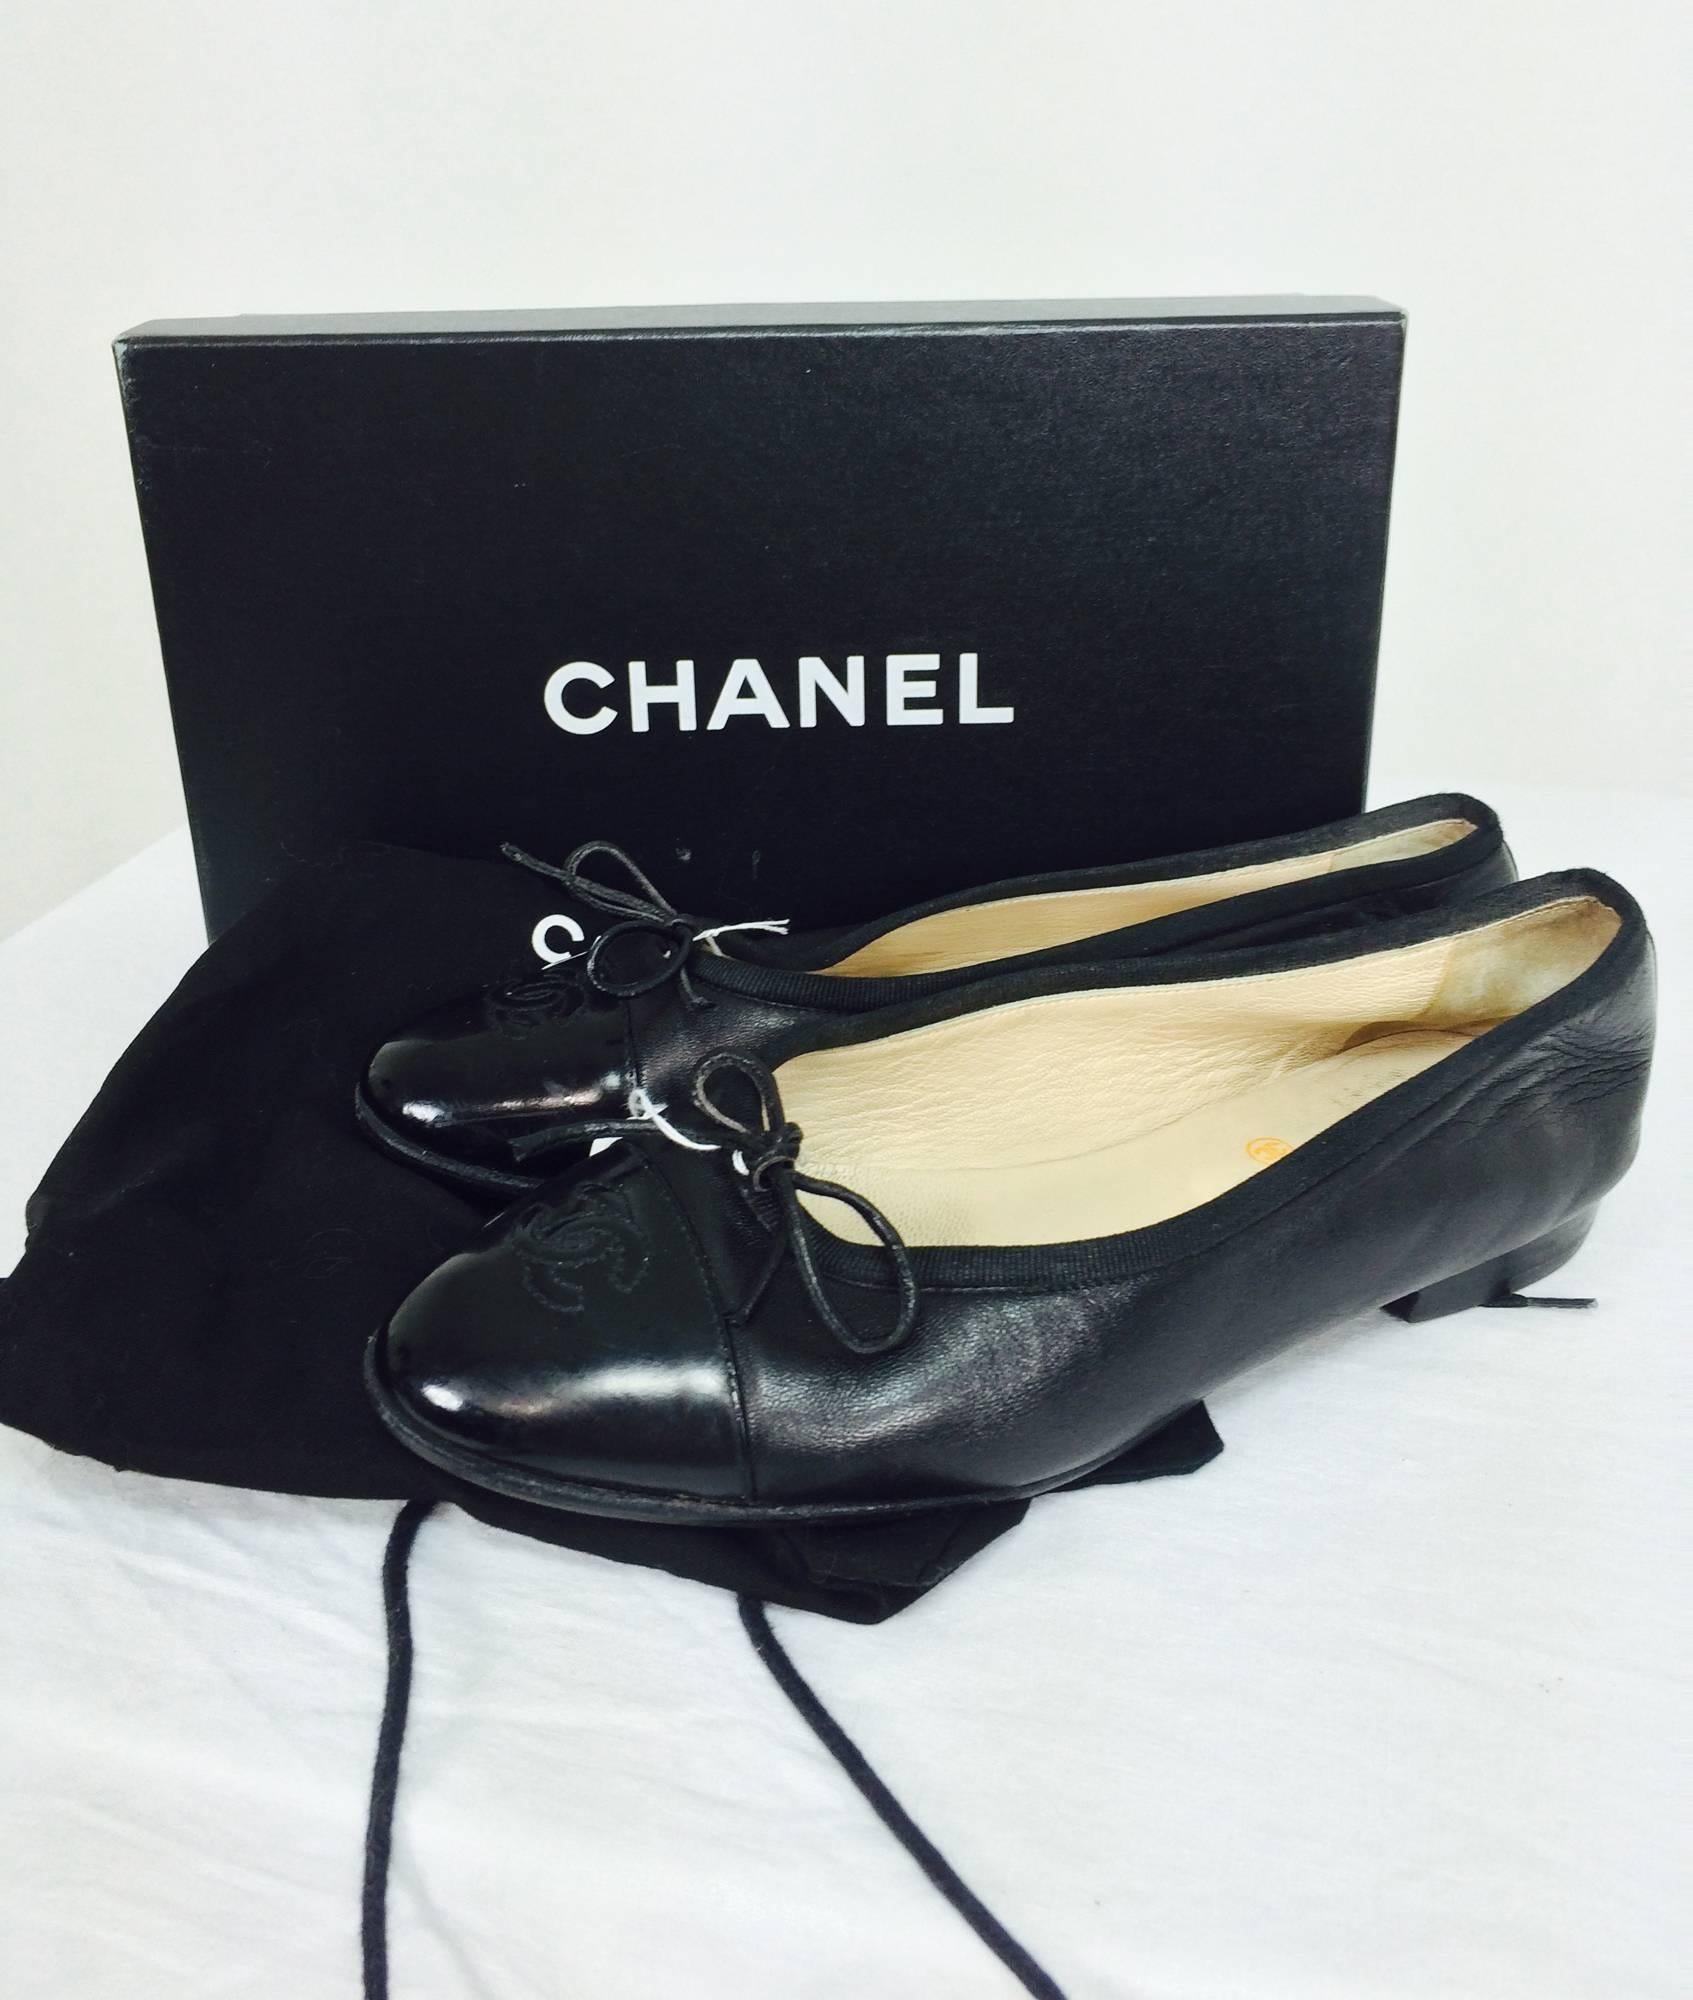 Chanel soft black black lambskin leather ballet flats, with glossy logo toe caps...Bow tie front...38M...In very good pre owned condition...Original box with dust covers included